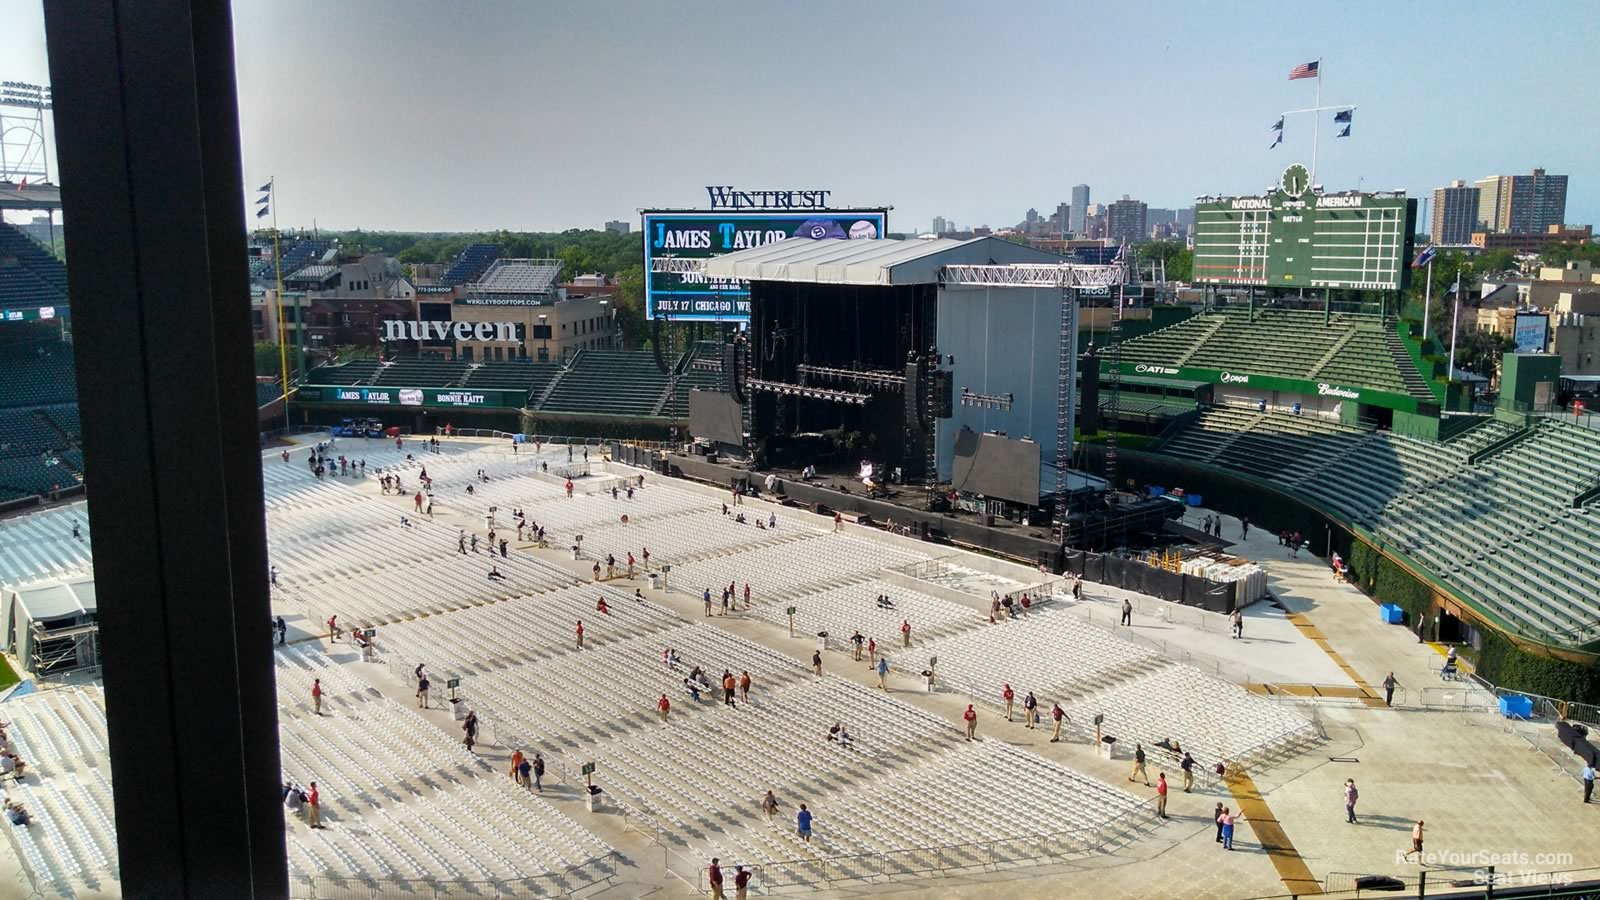 section 428, row 4 seat view  for concert - wrigley field